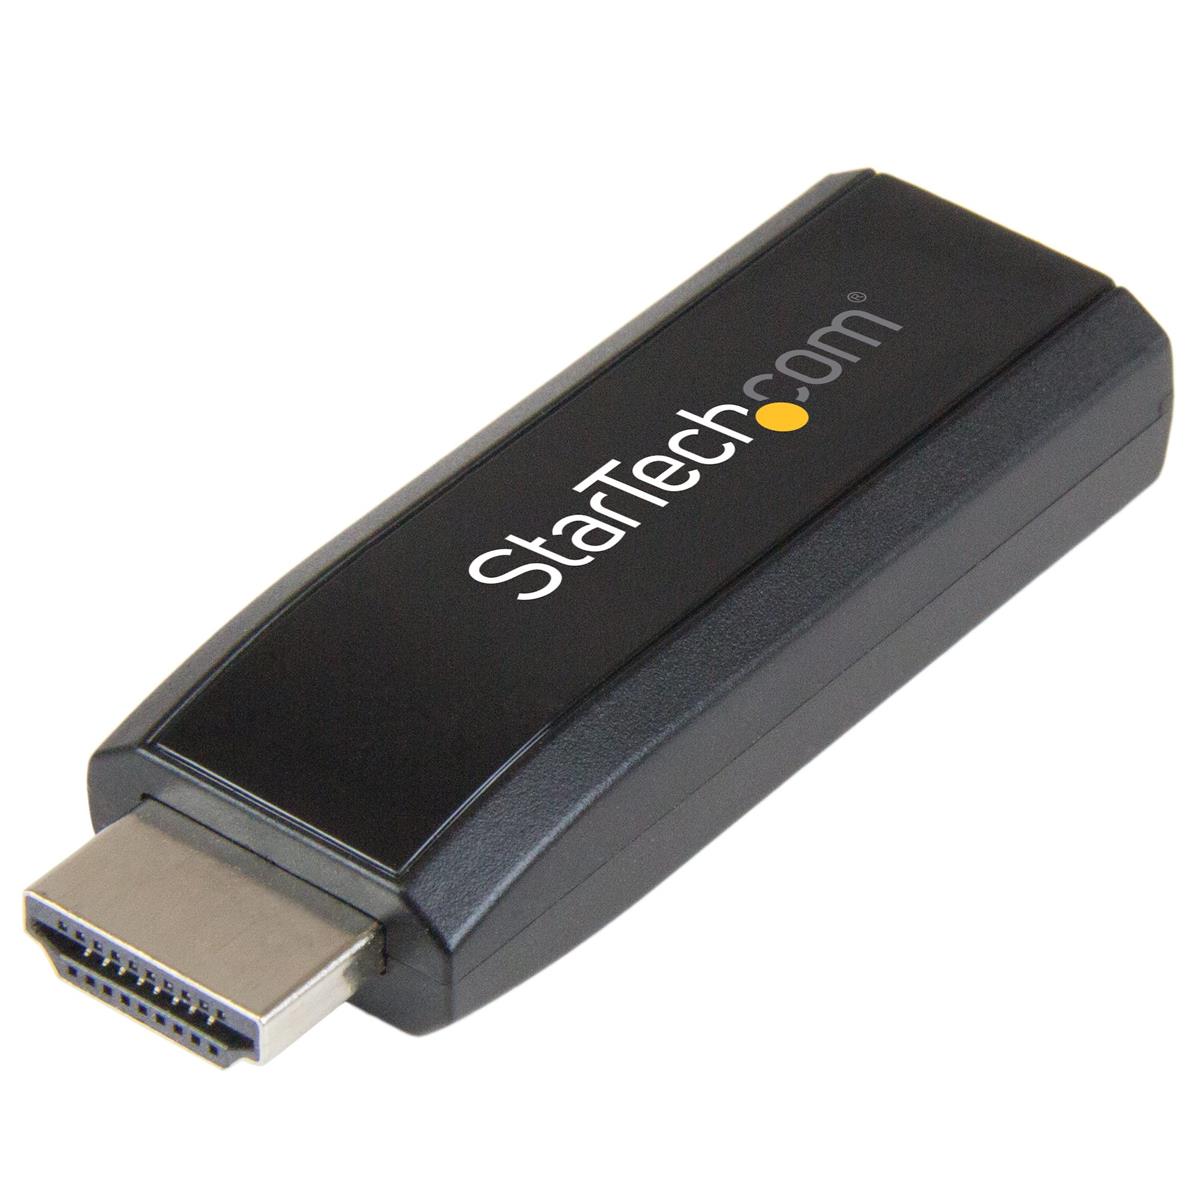 

StarTech HDMI to VGA Adapter with Audio Output